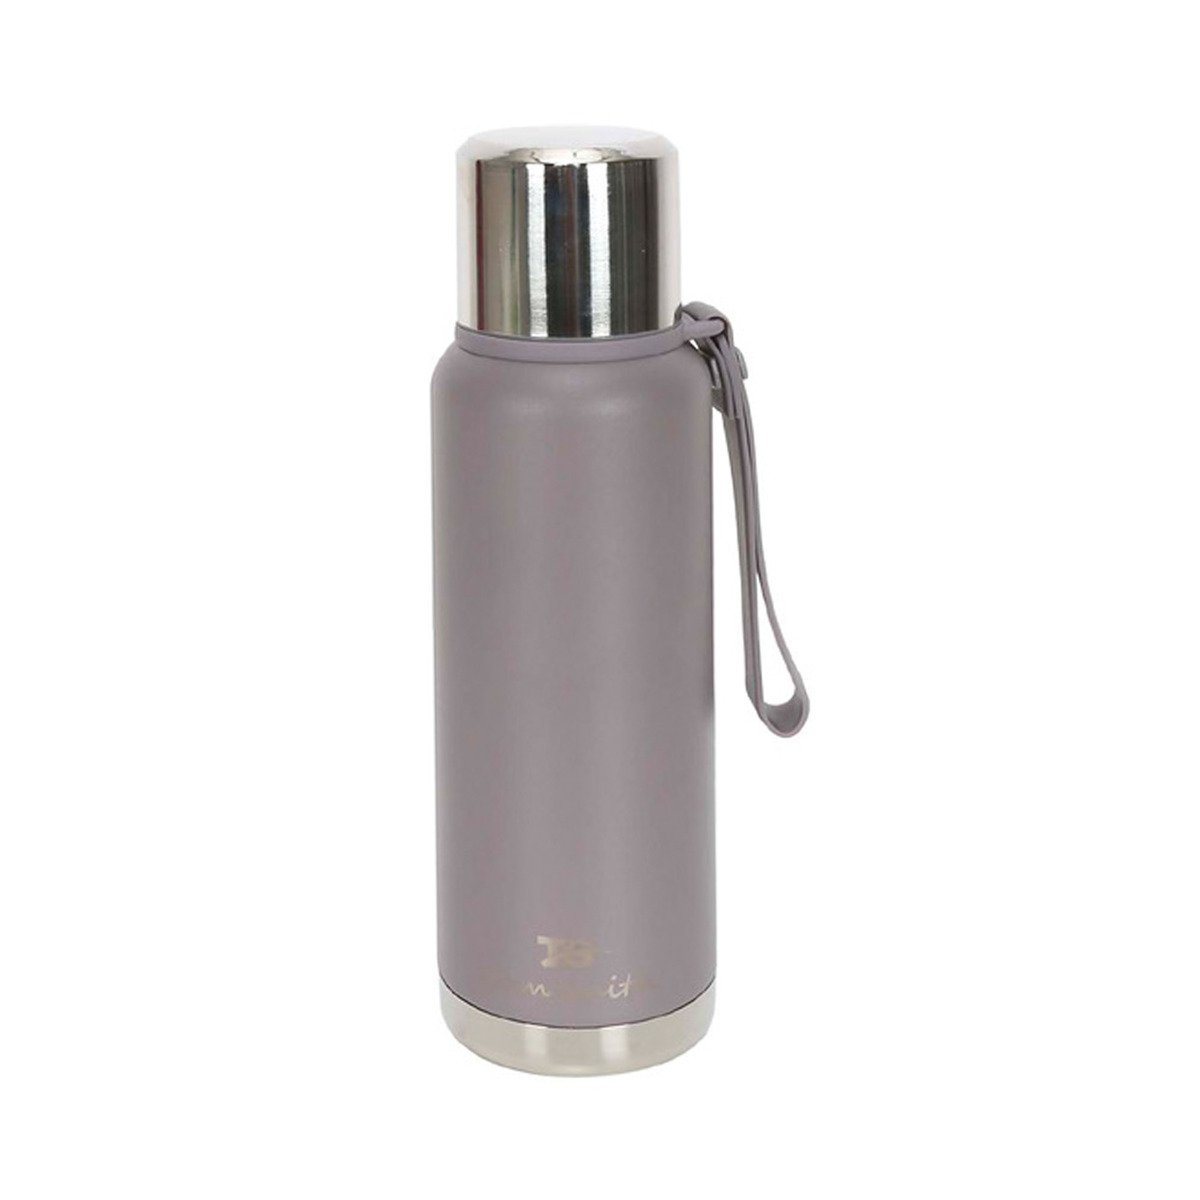 Tom Smith Stainless Steel Vacuum Bottle Flask 500ml XB-19130 Assorted Colors